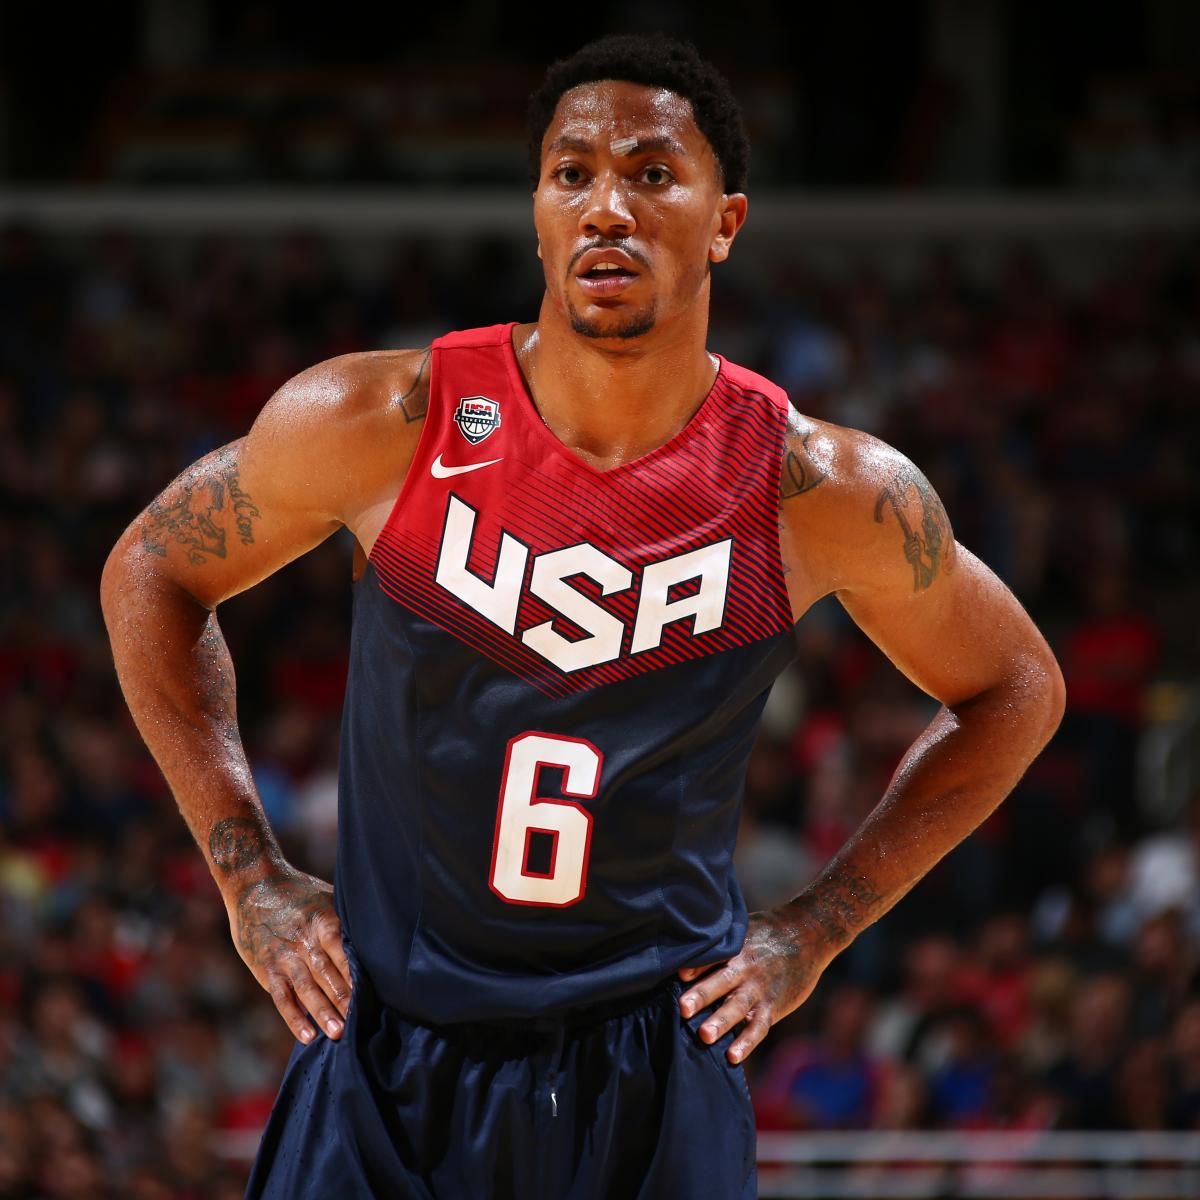 Derrick Rose - NBA Point guard - News, Stats, Bio and more - The Athletic